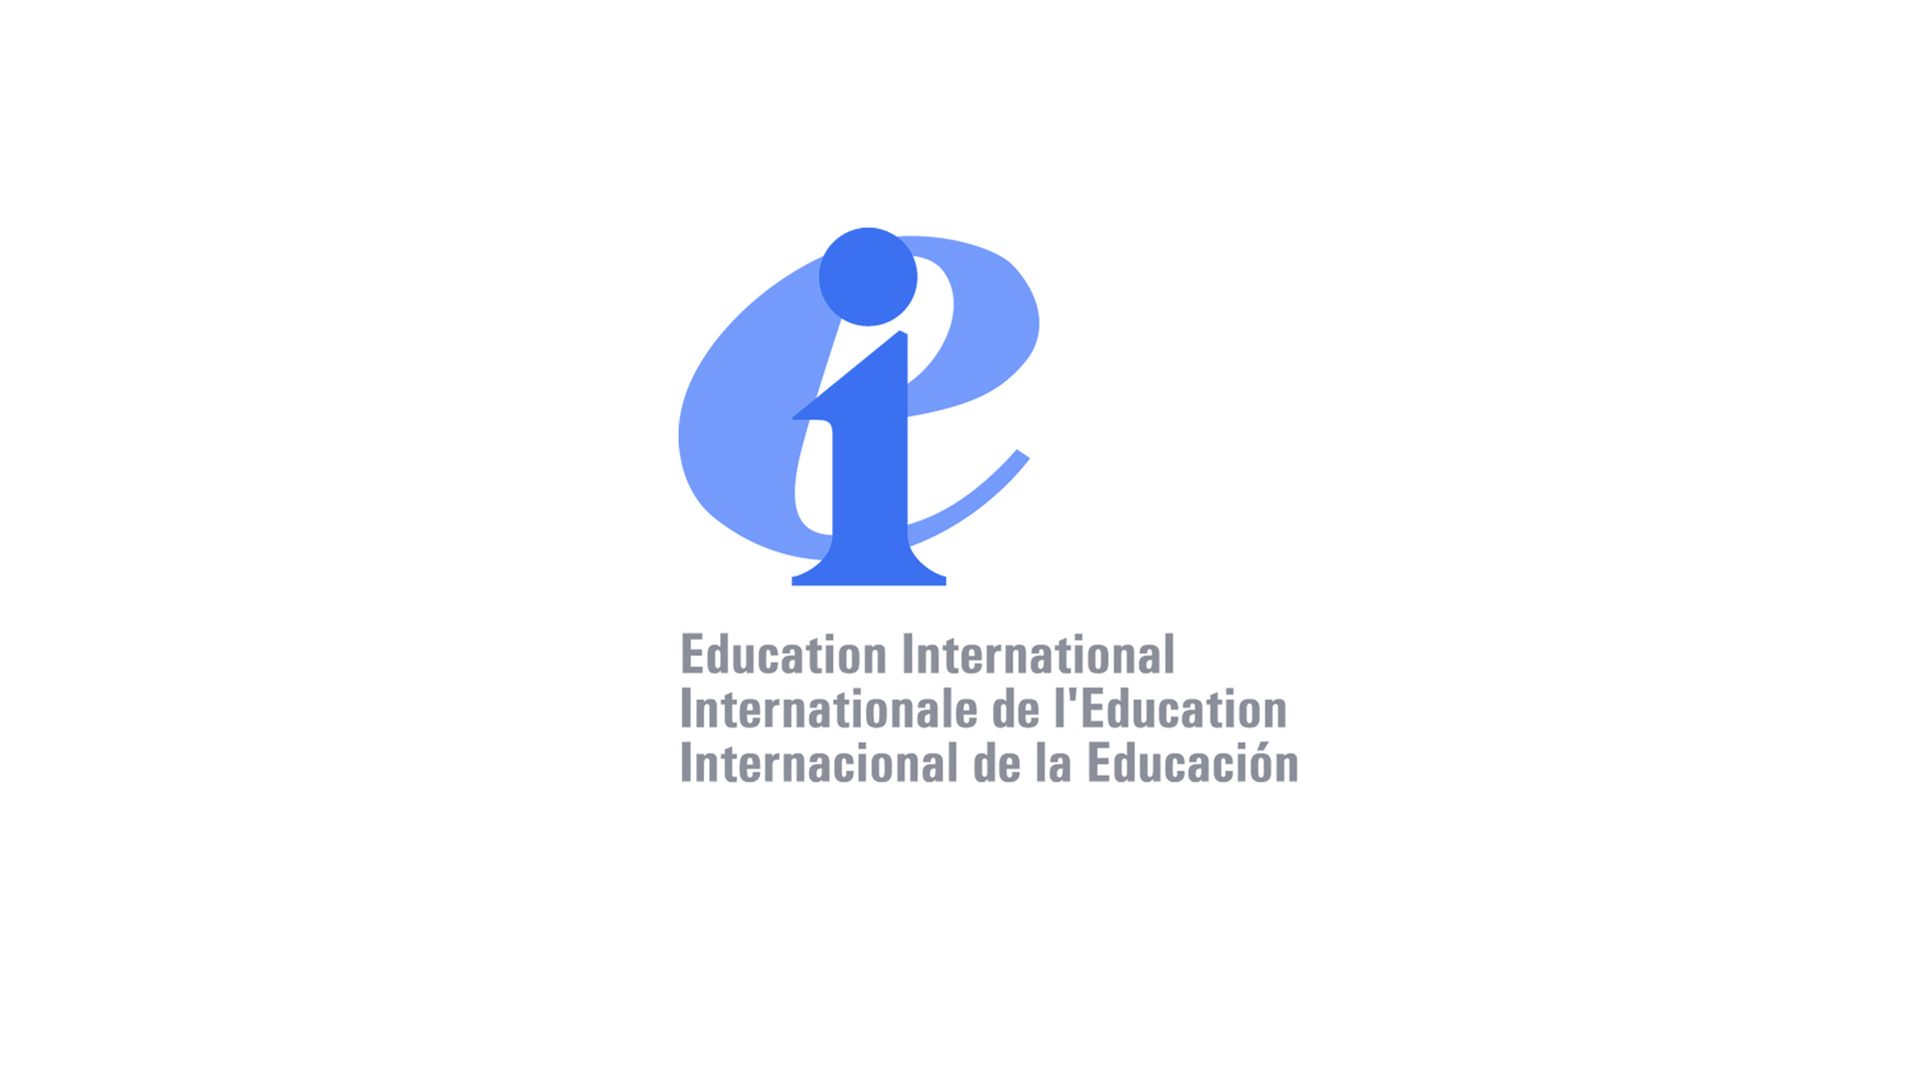 Education International is hiring a Research, Policy and Advocacy Coordinator